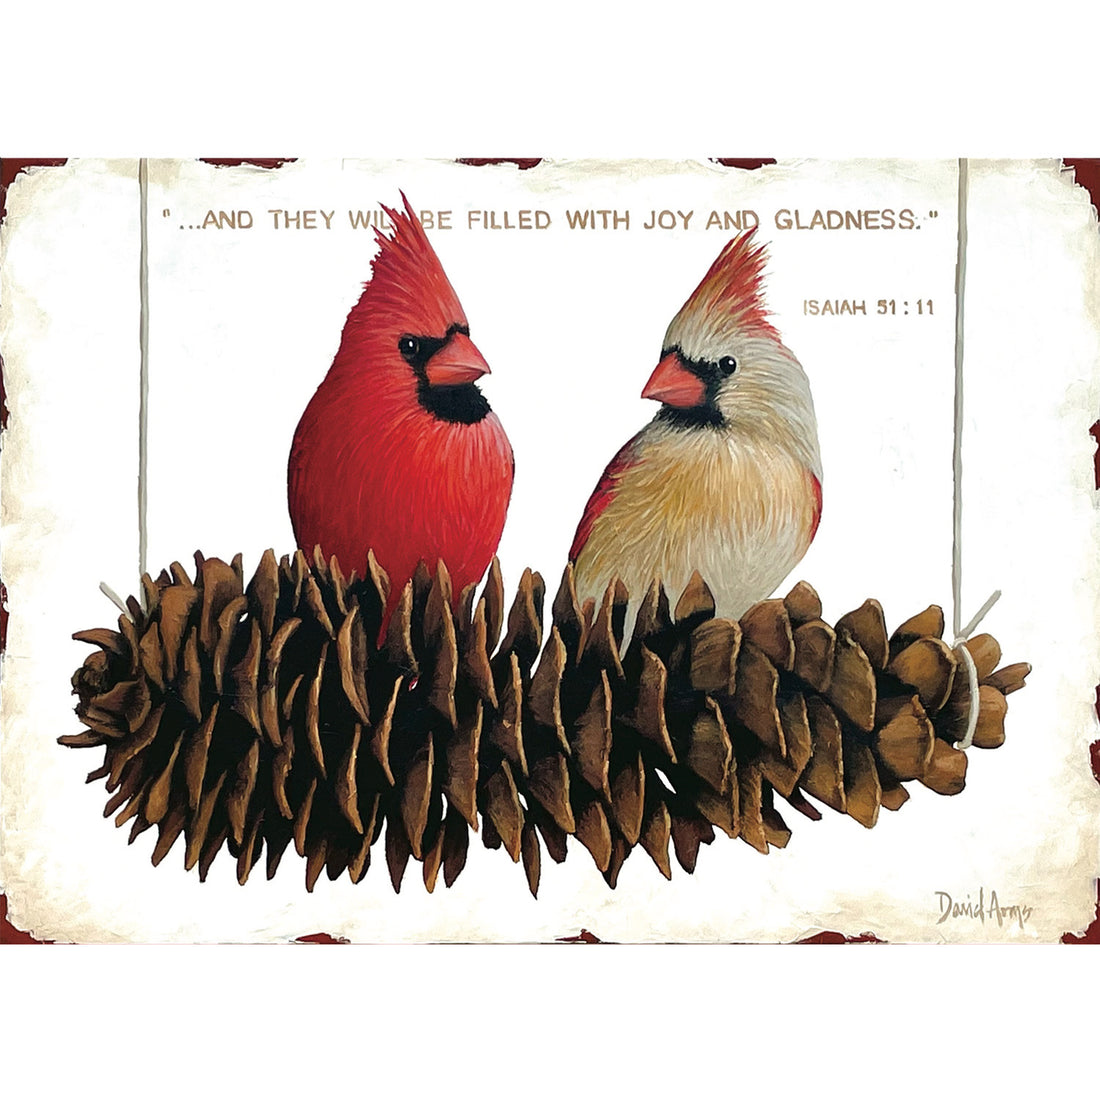 An illustration of two cardinals, a red male and a brown female, resting on a pinecone over a light tan background, with Bible quote &quot;Isaiah 51:11&quot; printed over the birds&